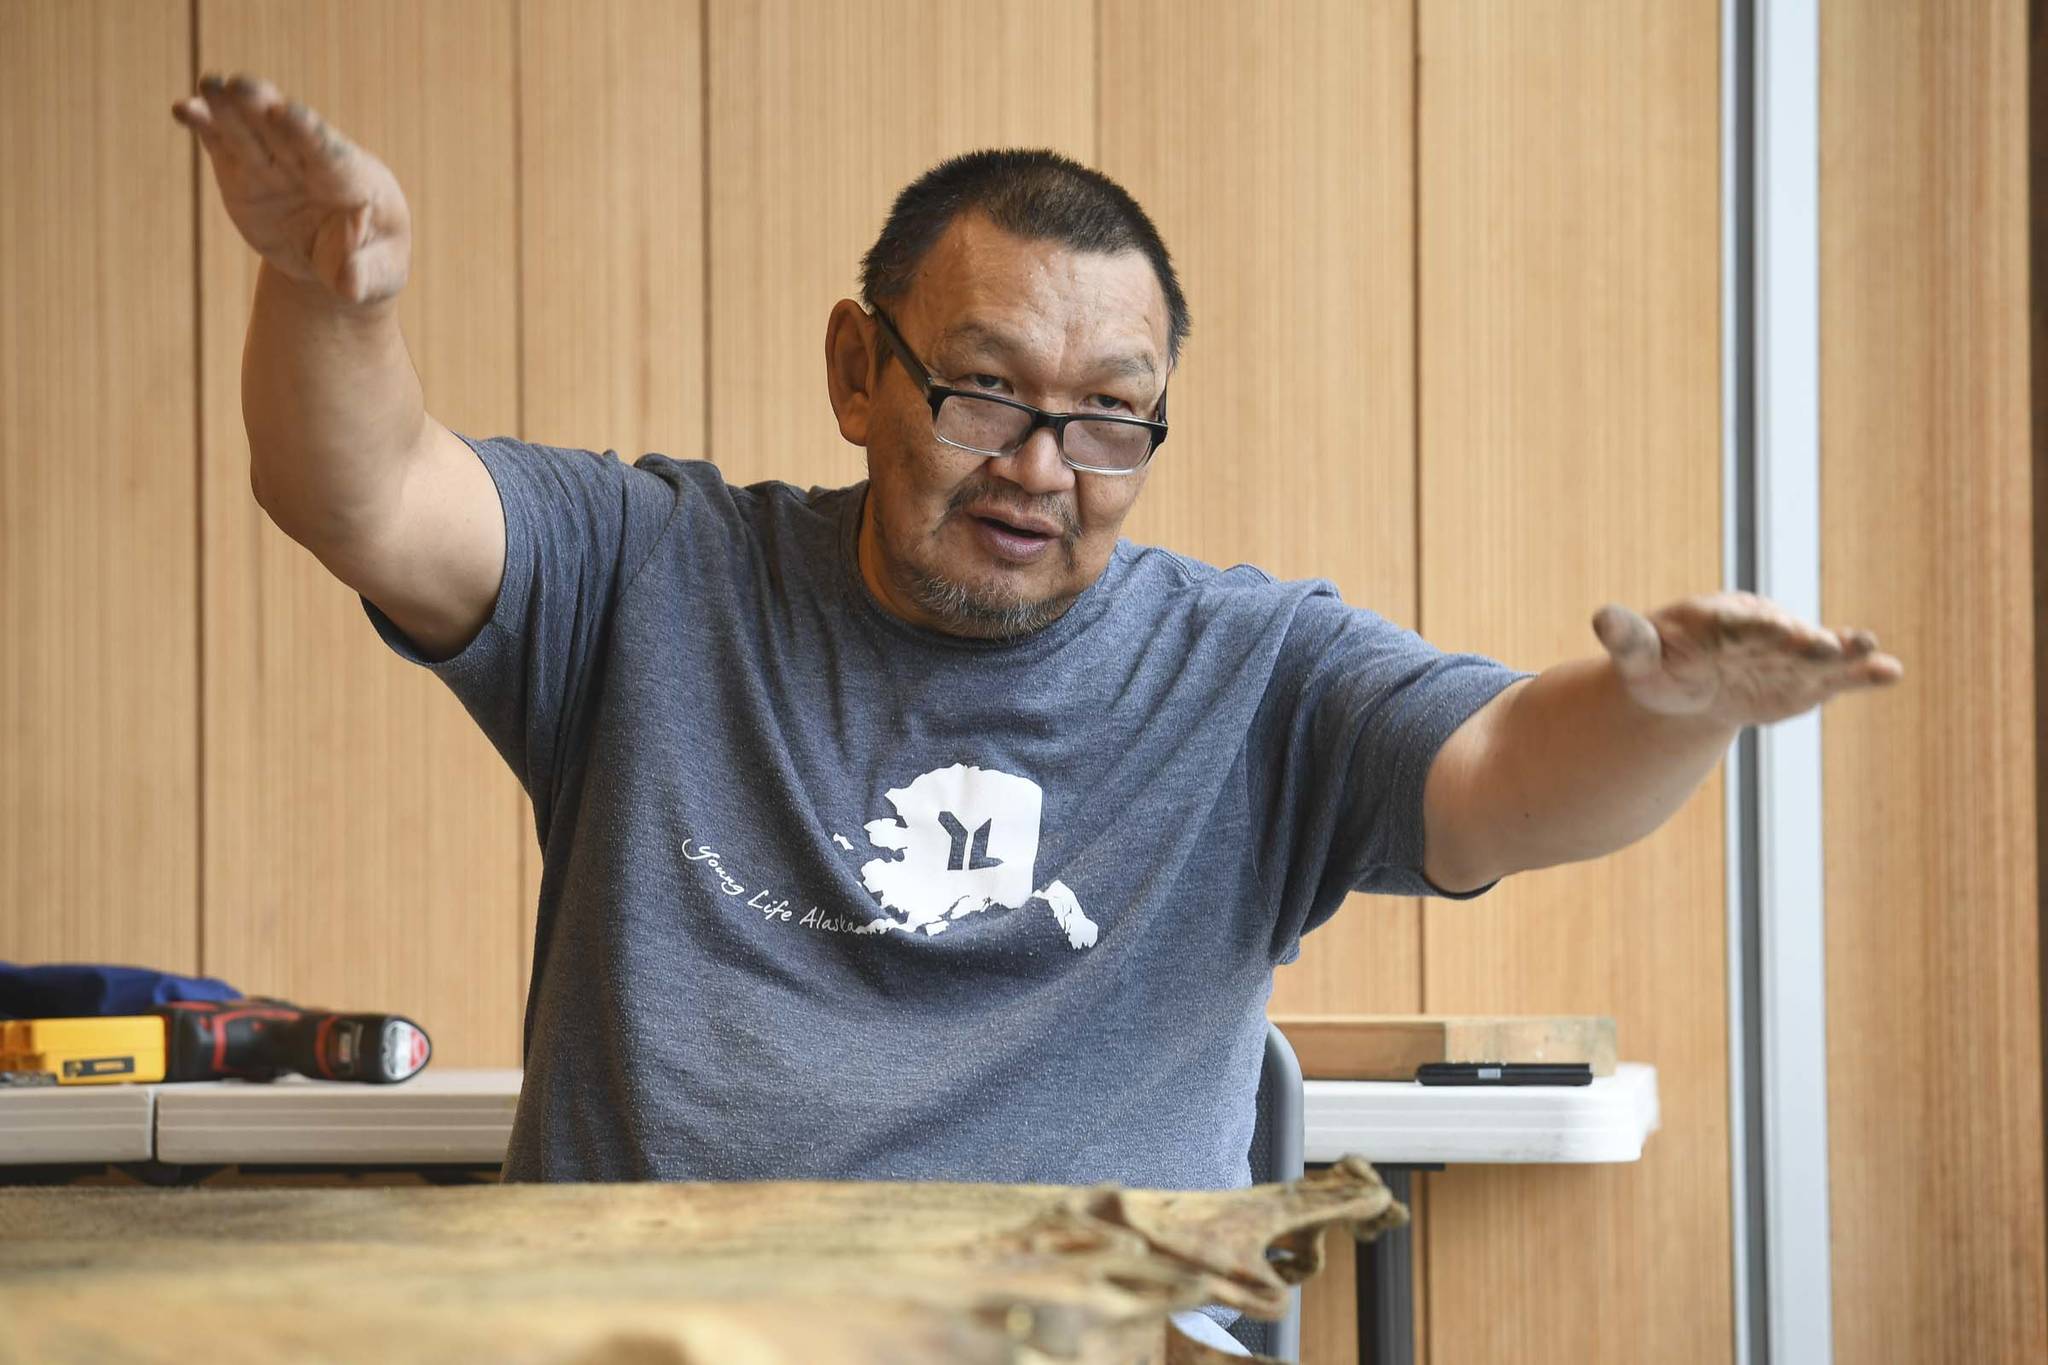 John Waghiyi, Jr. artist and whaling captain, talks about preparing a walrus hide as he sews a blanket at the Walter Soboleff Center on Tuesday, Aug. 27, 2019. the Waghiyis will demonstrate dances from their region from noon-1 pm, Wednesday, Aug. 28, for the public at SHI. (Michael Penn | Juneau Empire)